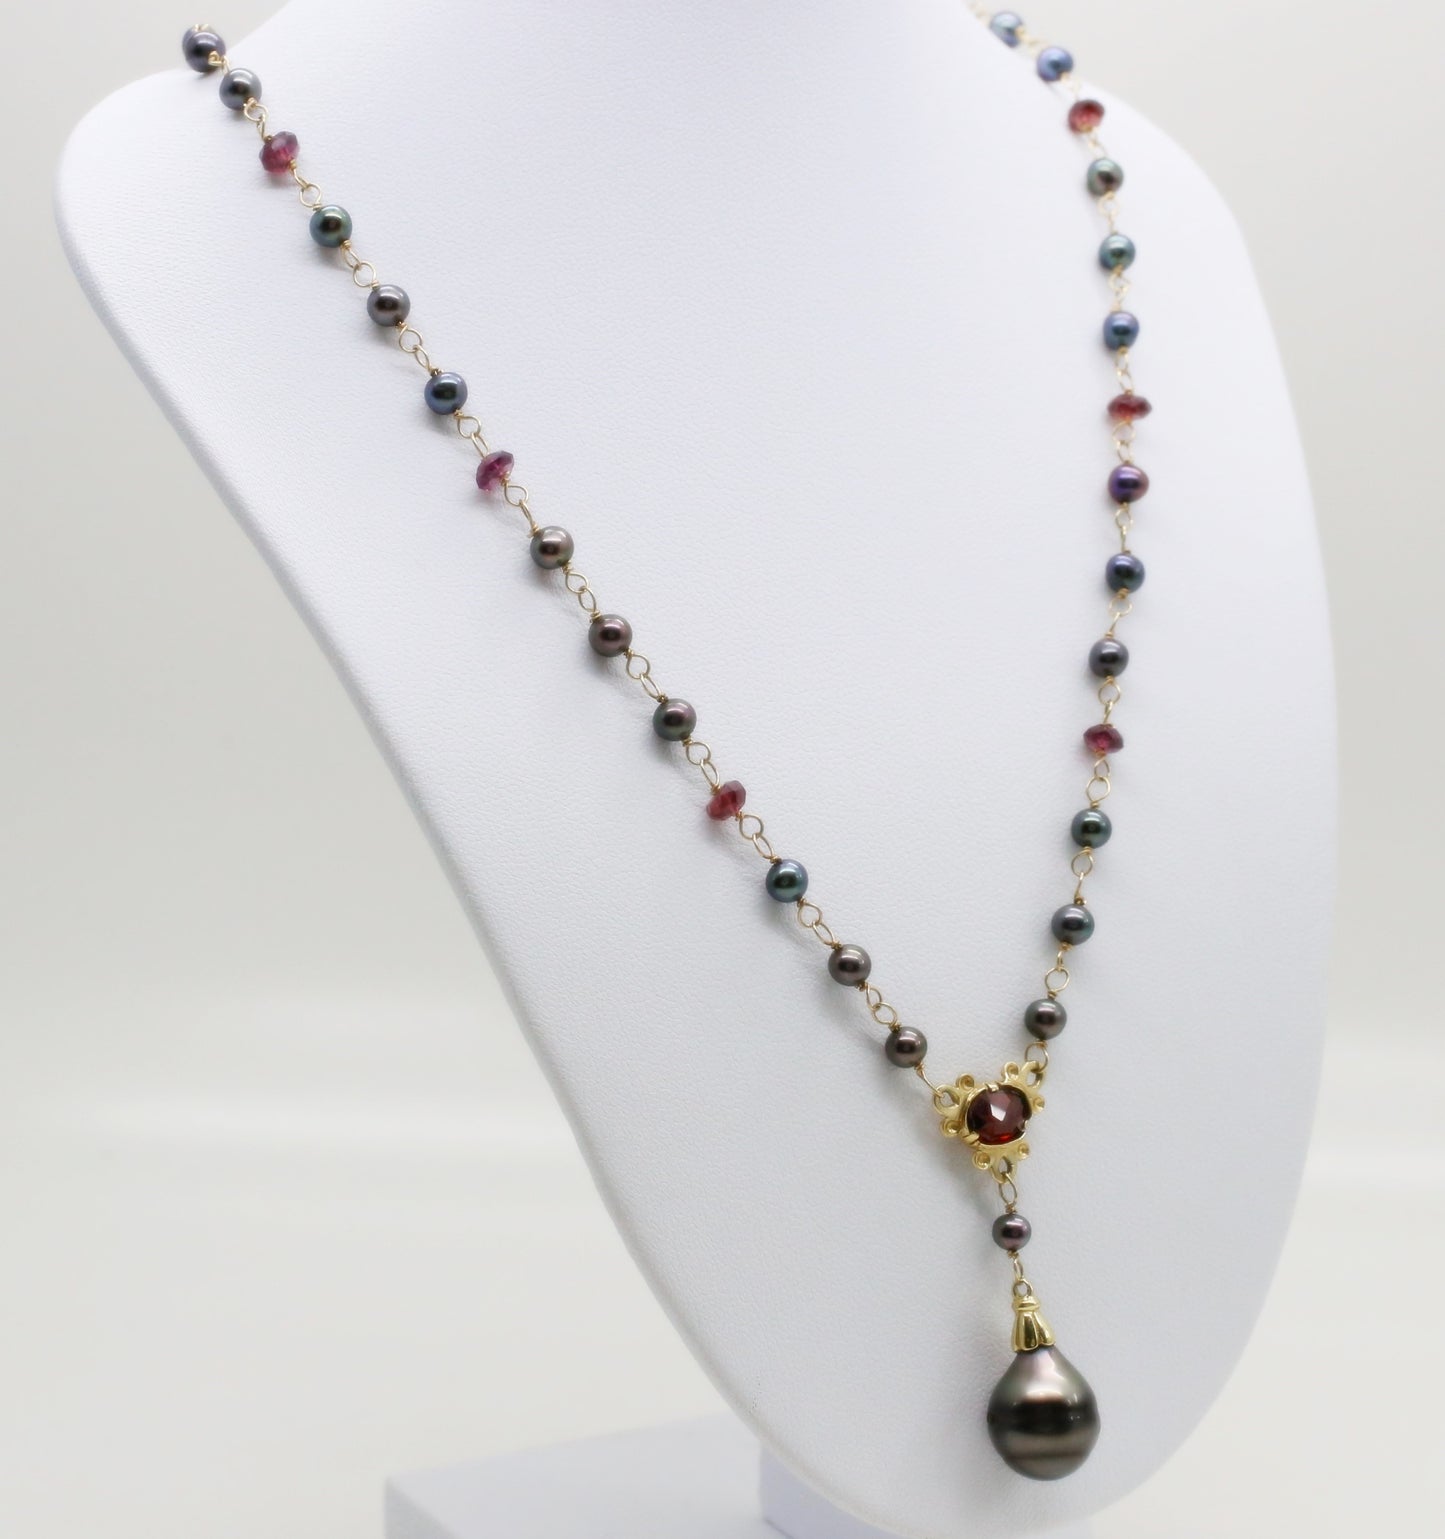 14k Yellow Gold Tahitian Pearl & Garnet Necklace, 18 inches - 12.3g